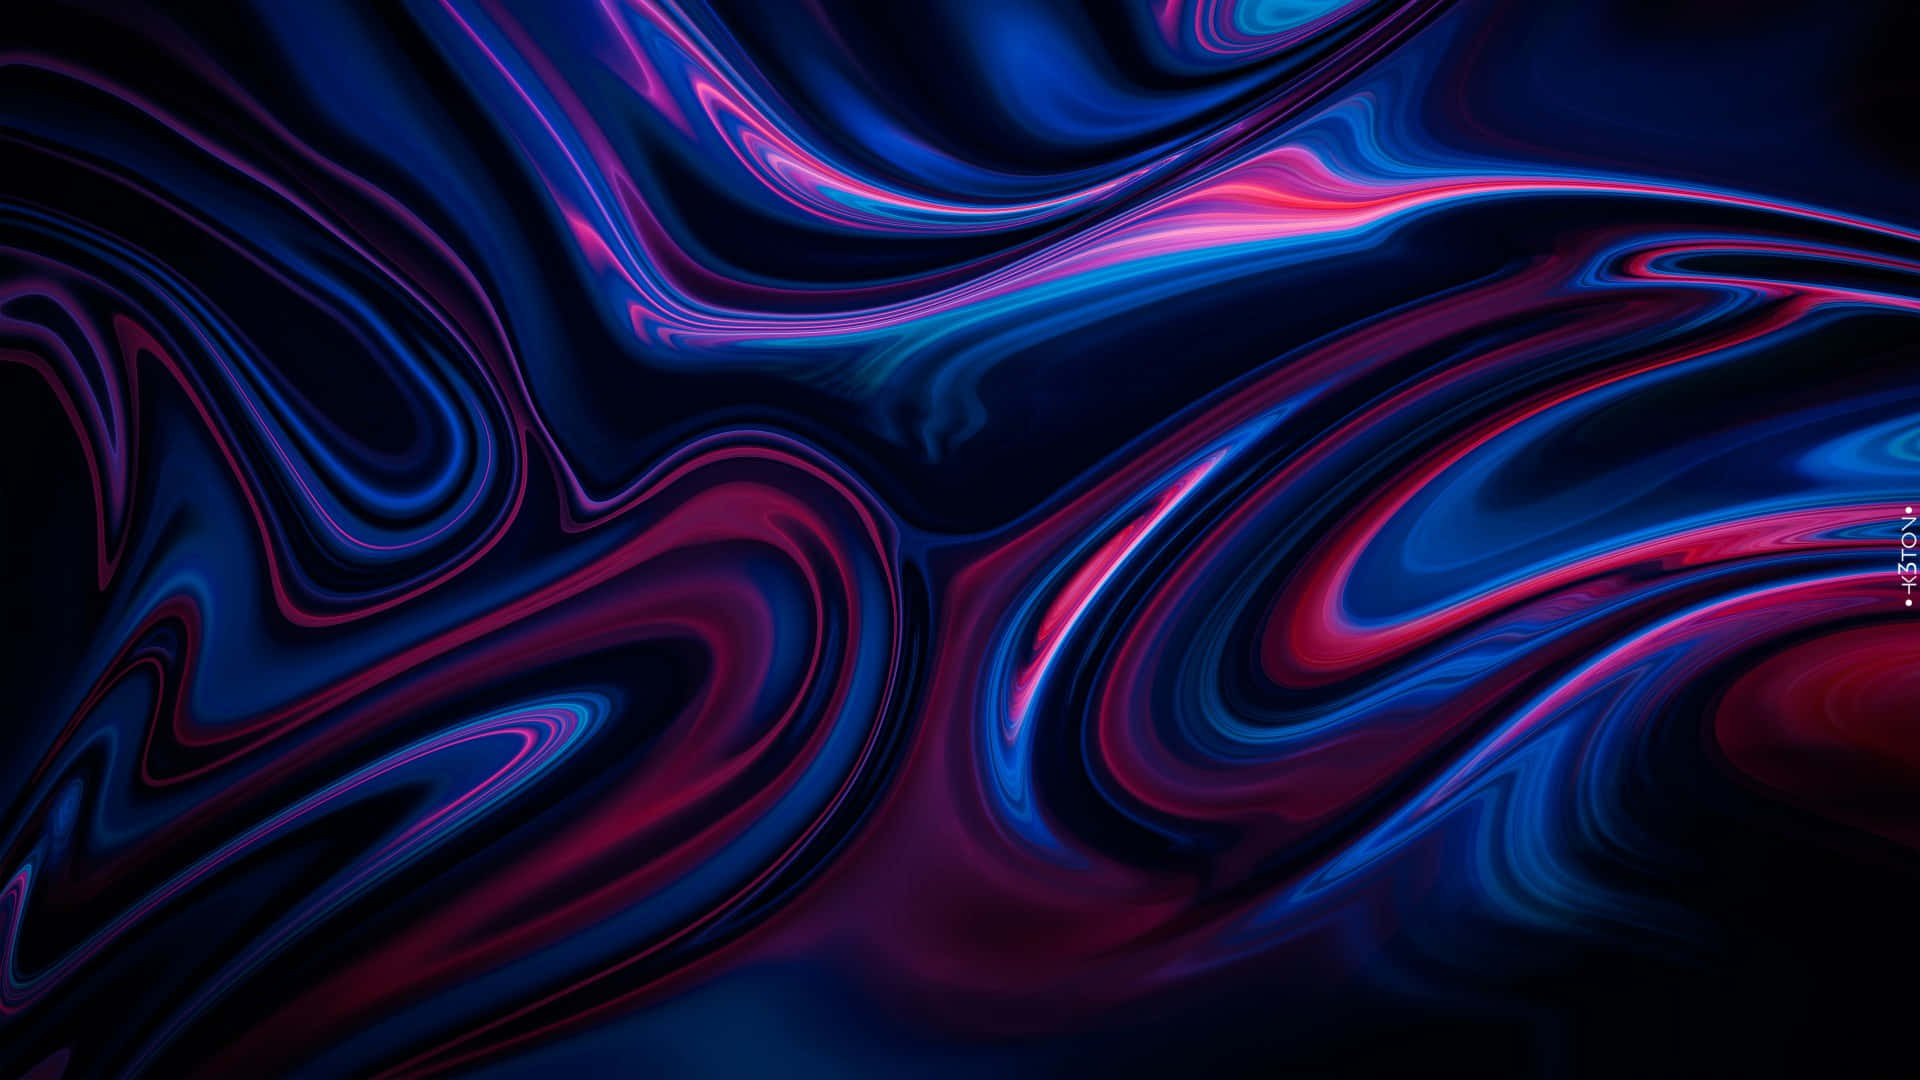 100+] Hd Satisfying Wallpapers | Wallpapers.com